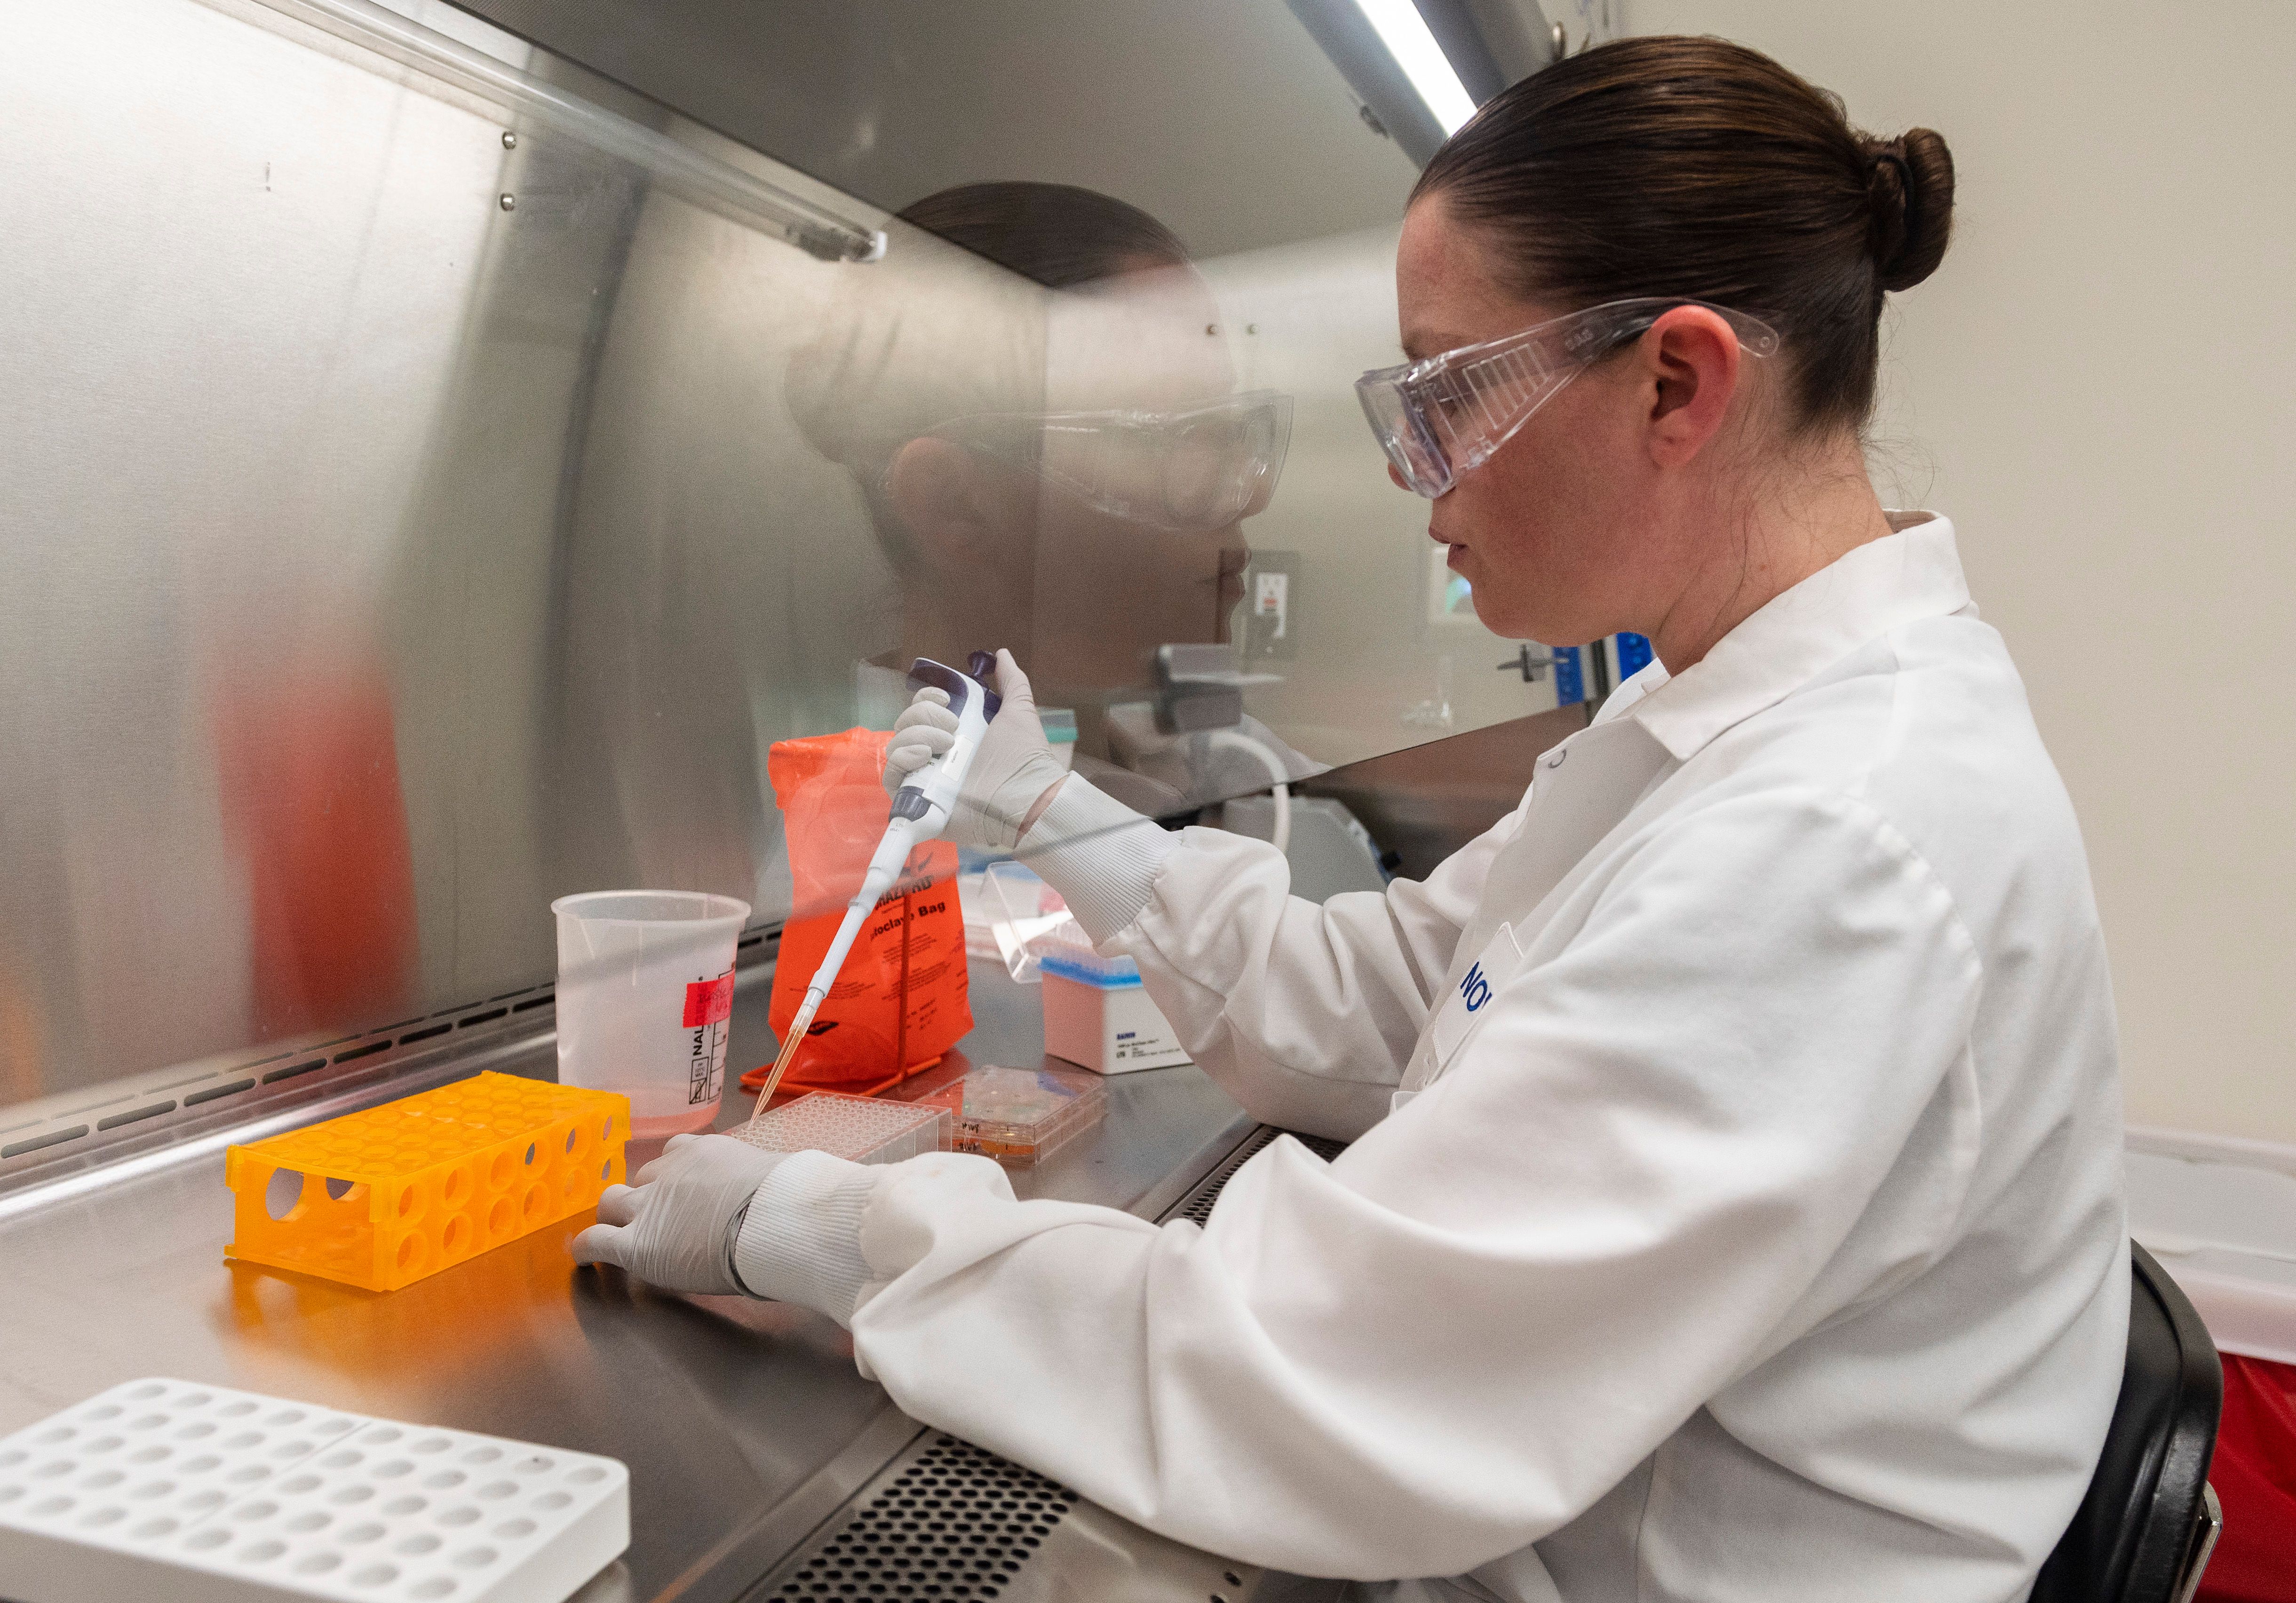 Dr. Rhonda Flores looks at protein samples at Novavax labs, which is developing a vaccine for the coronavirus, in Rockville, Maryland, on March 20.